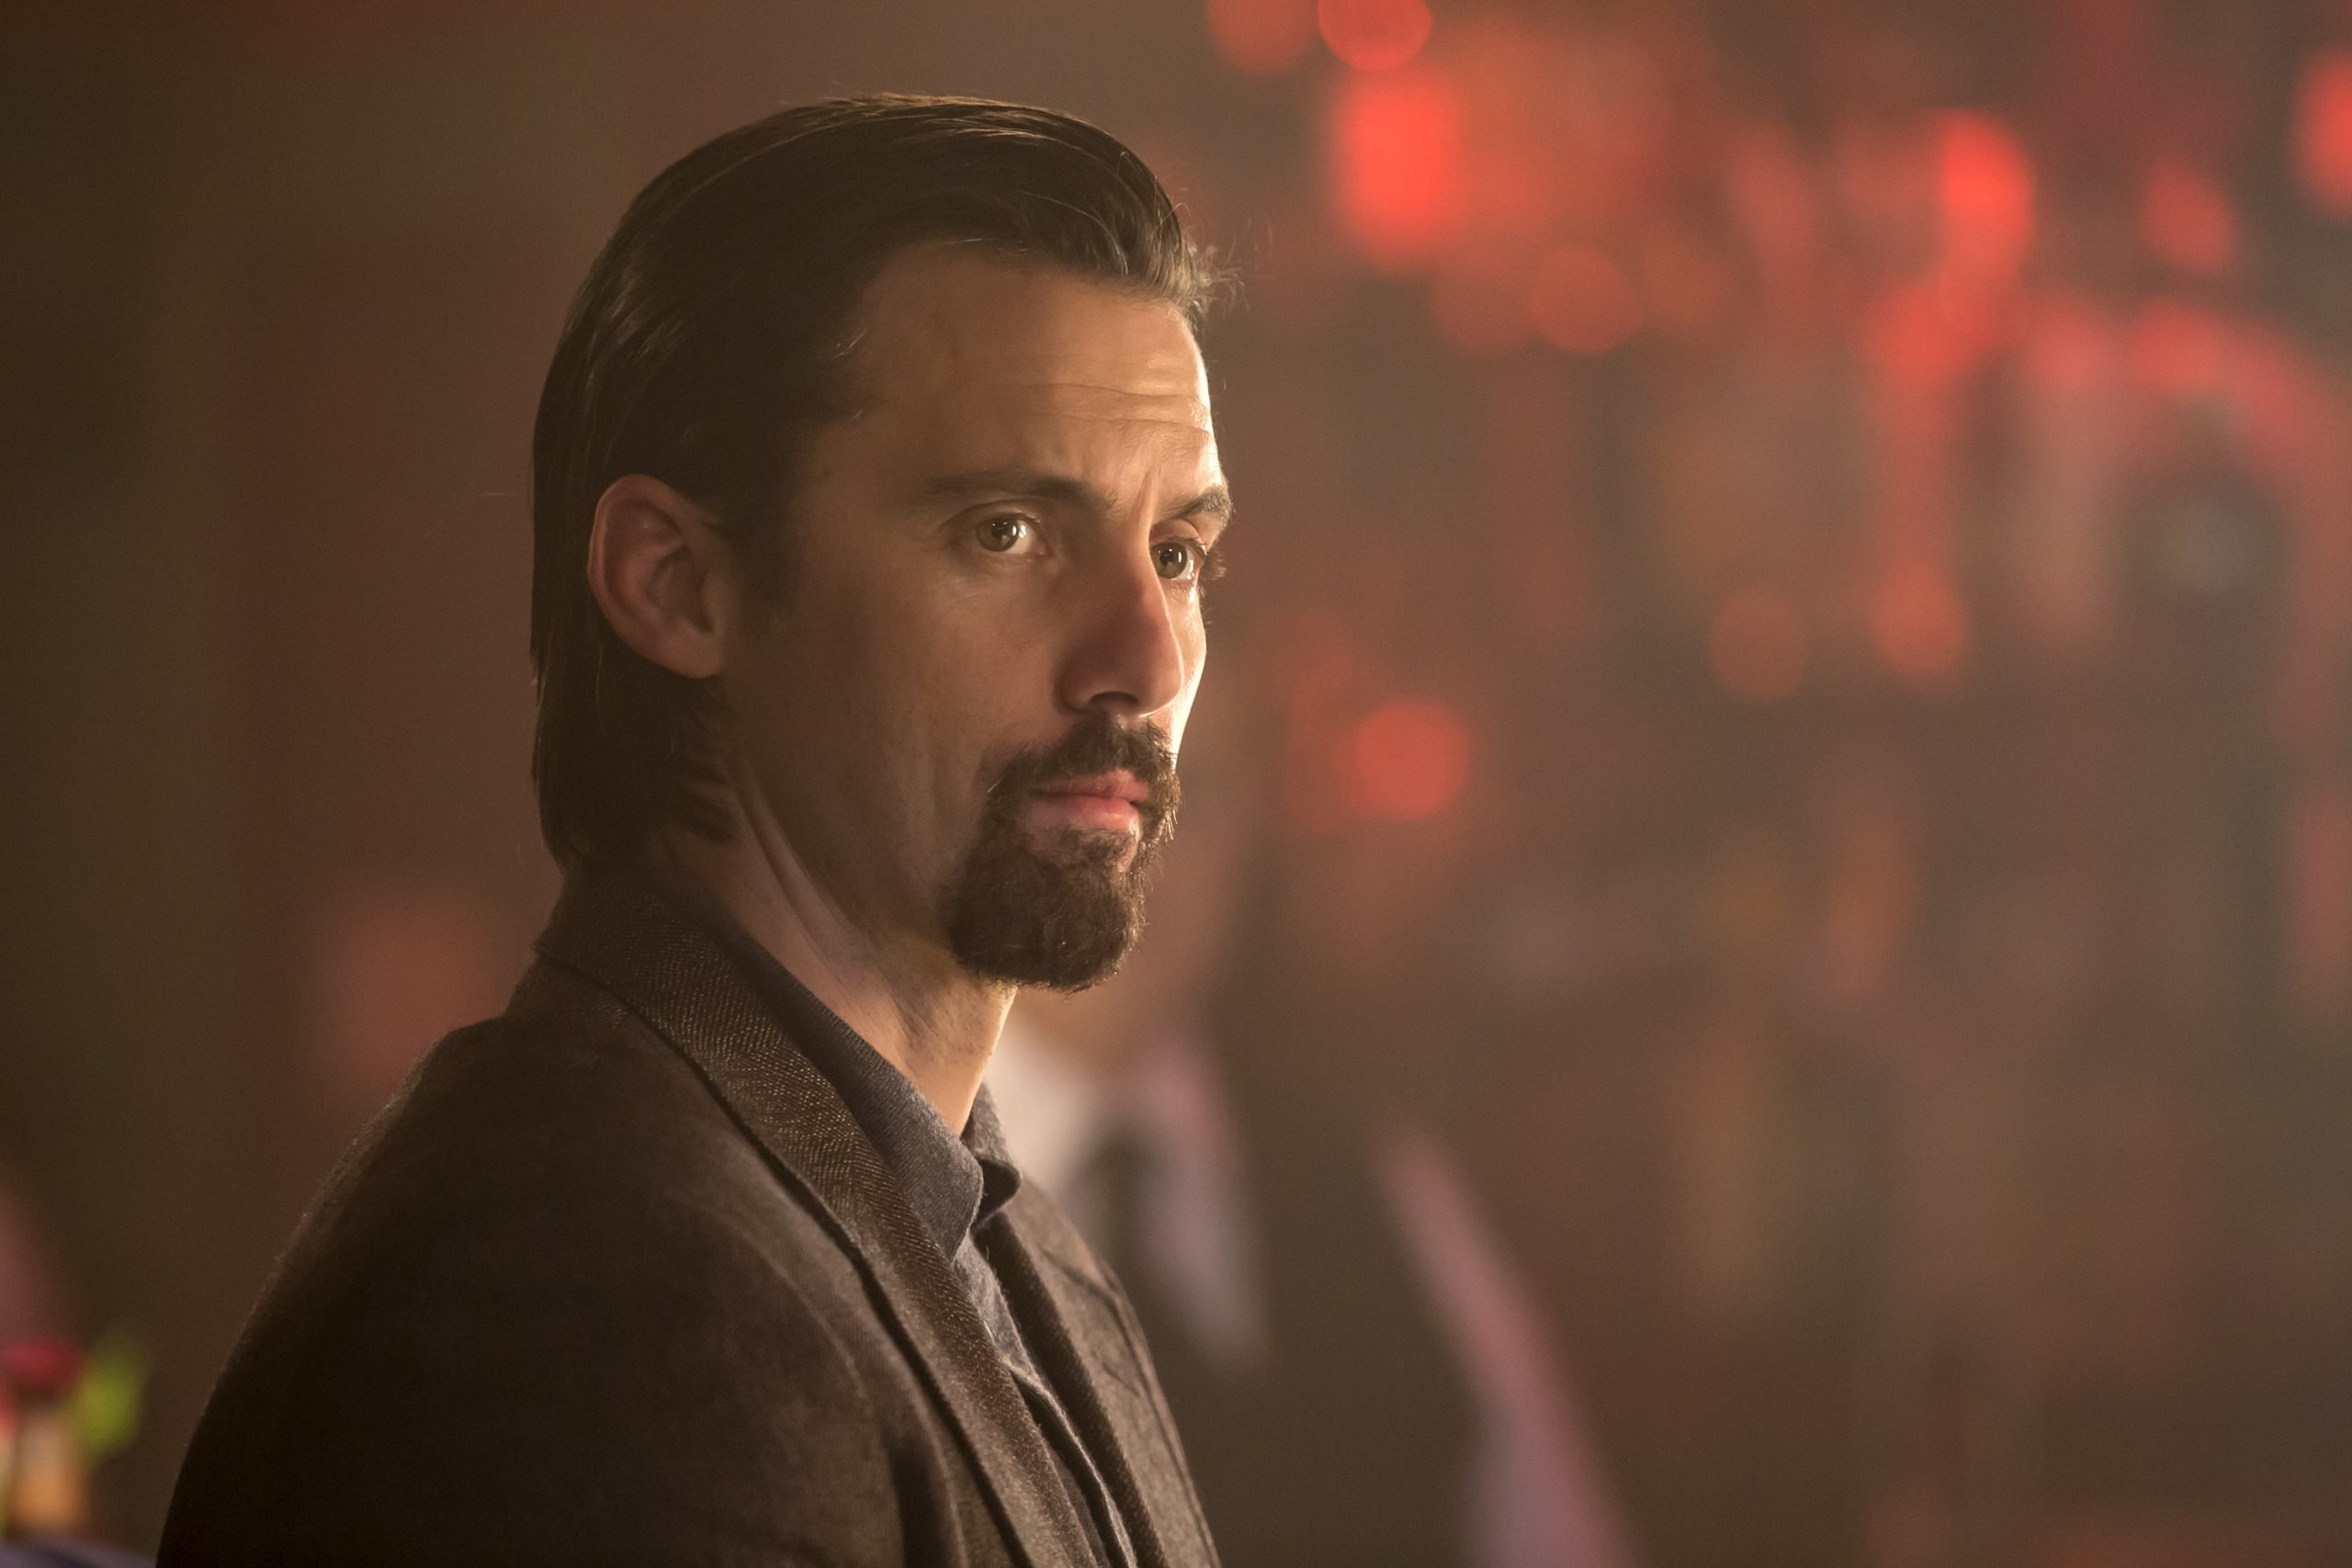 Milo Ventimiglia Reveals the ‘Most Heartbreaking’ Scene He Ever Filmed in ‘This Is Us’